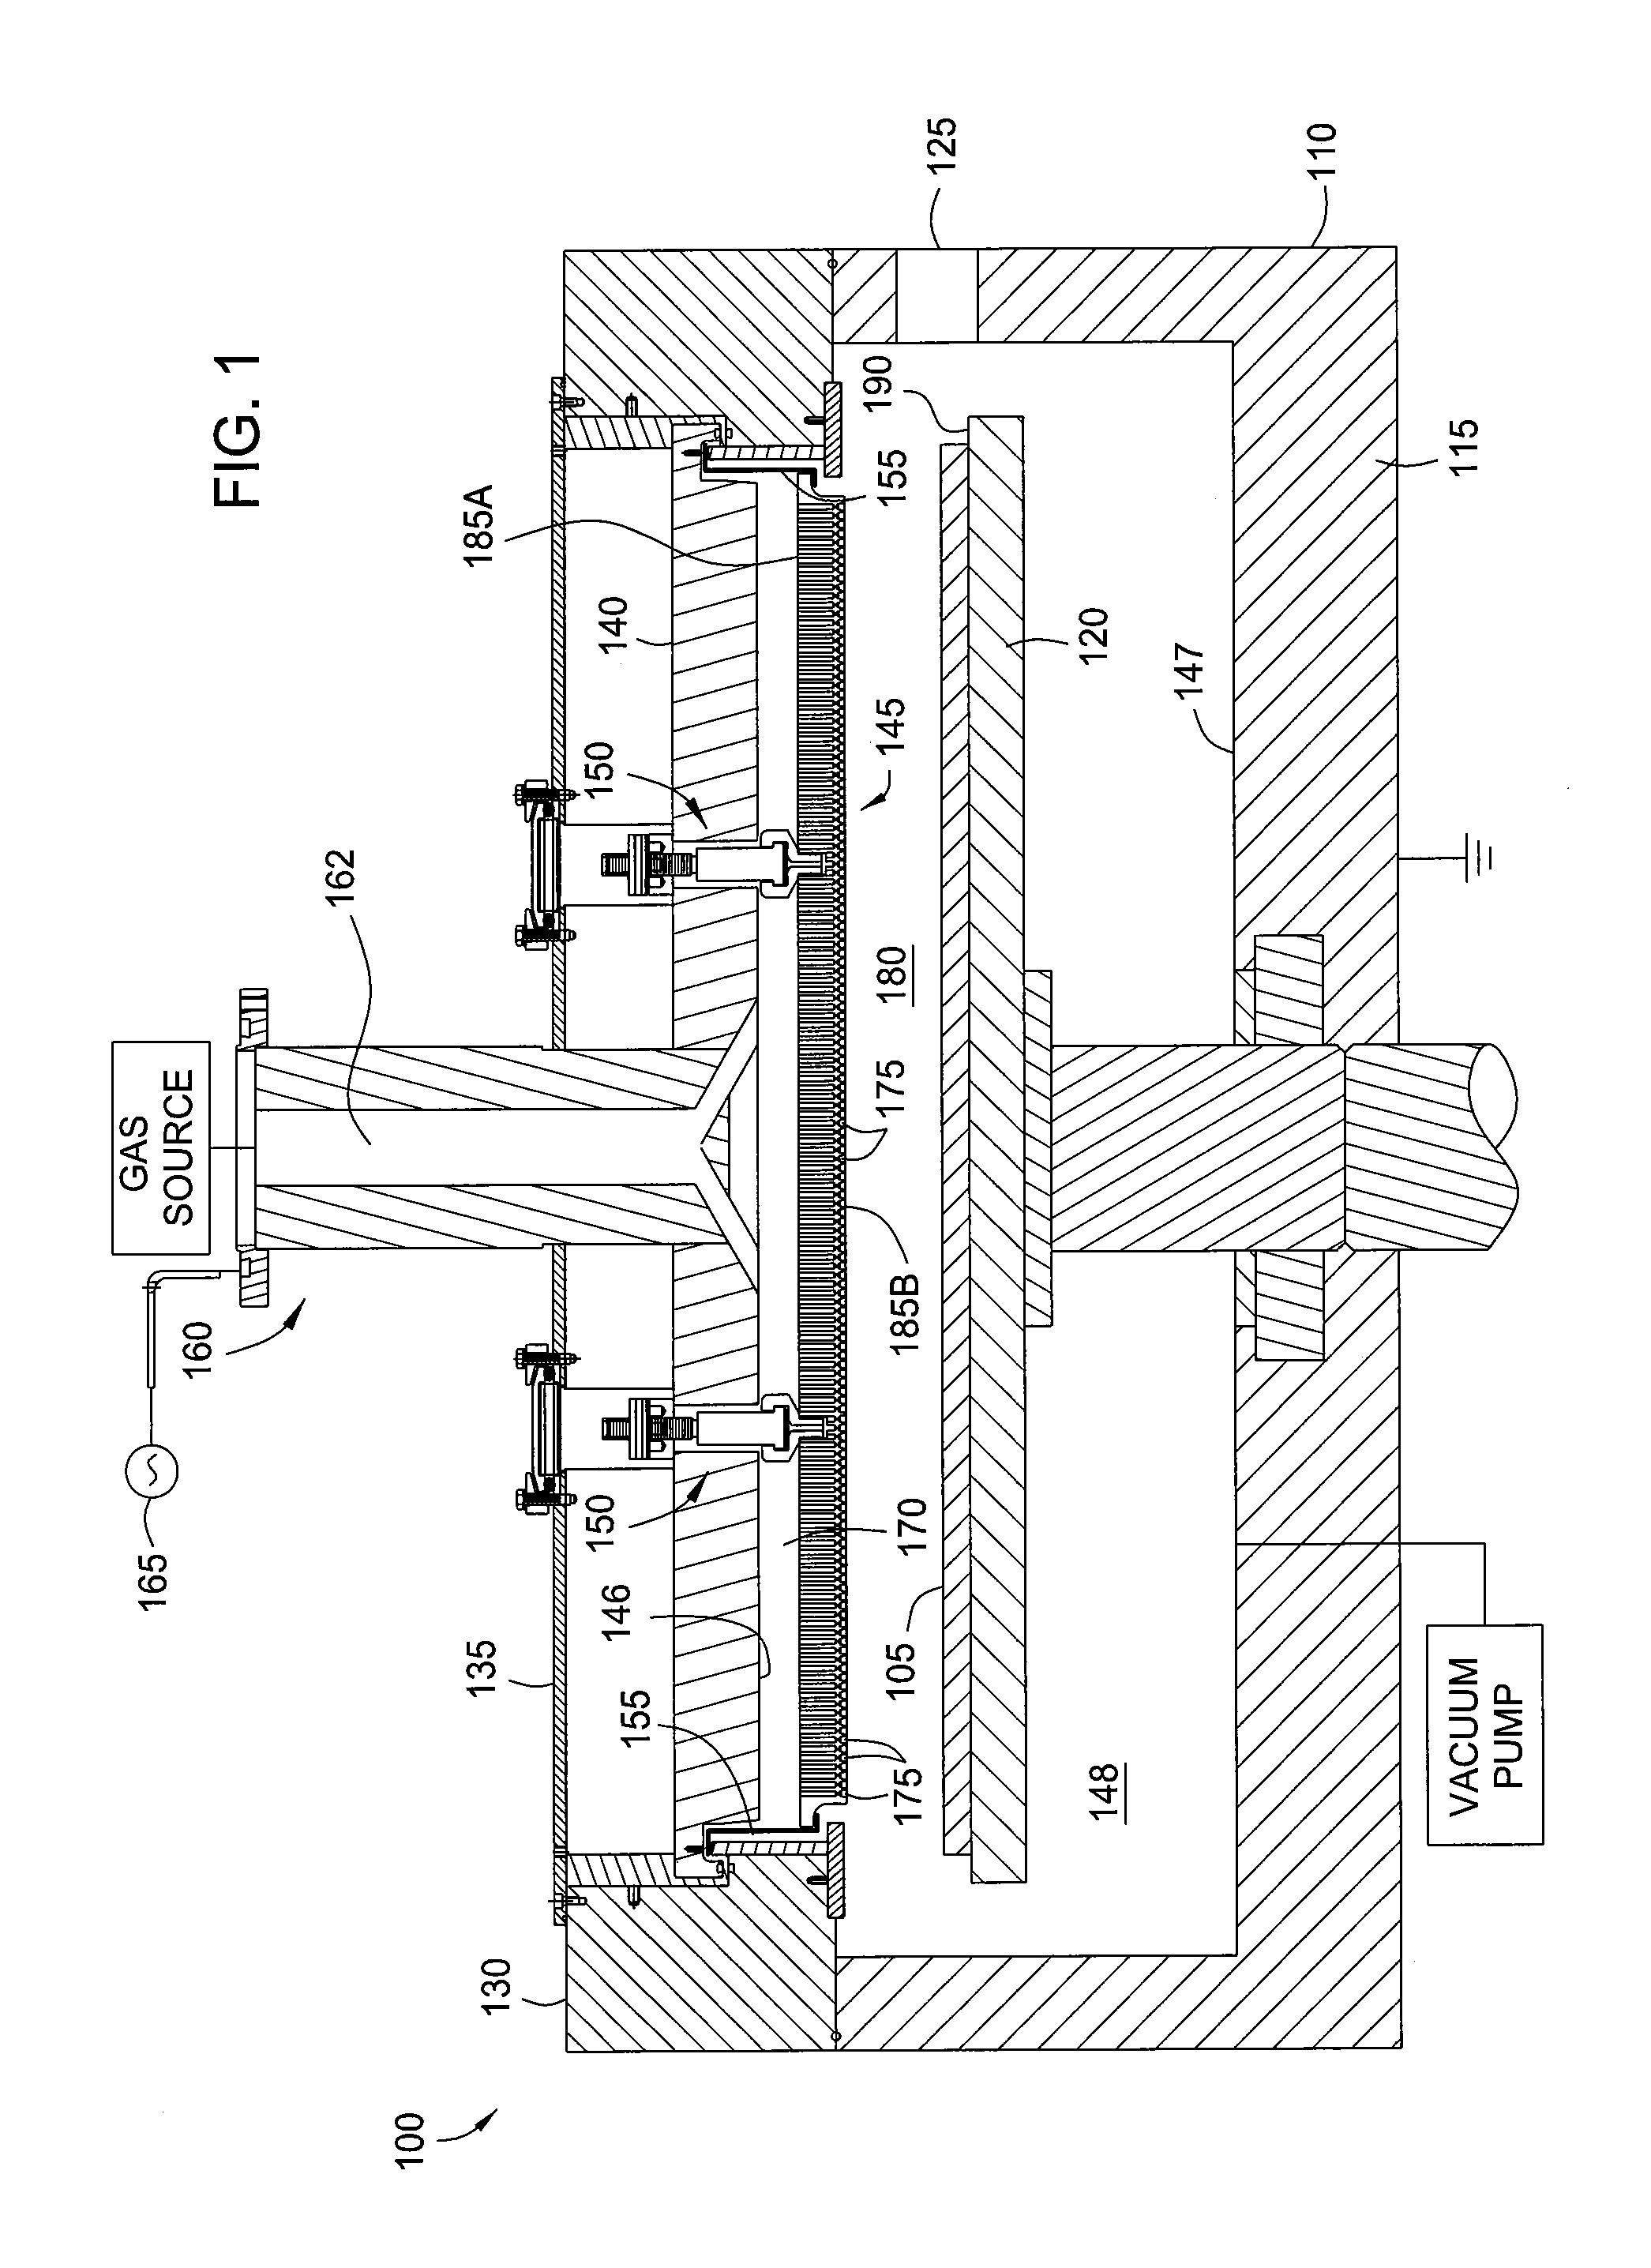 Showerhead support structure for improved gas flow